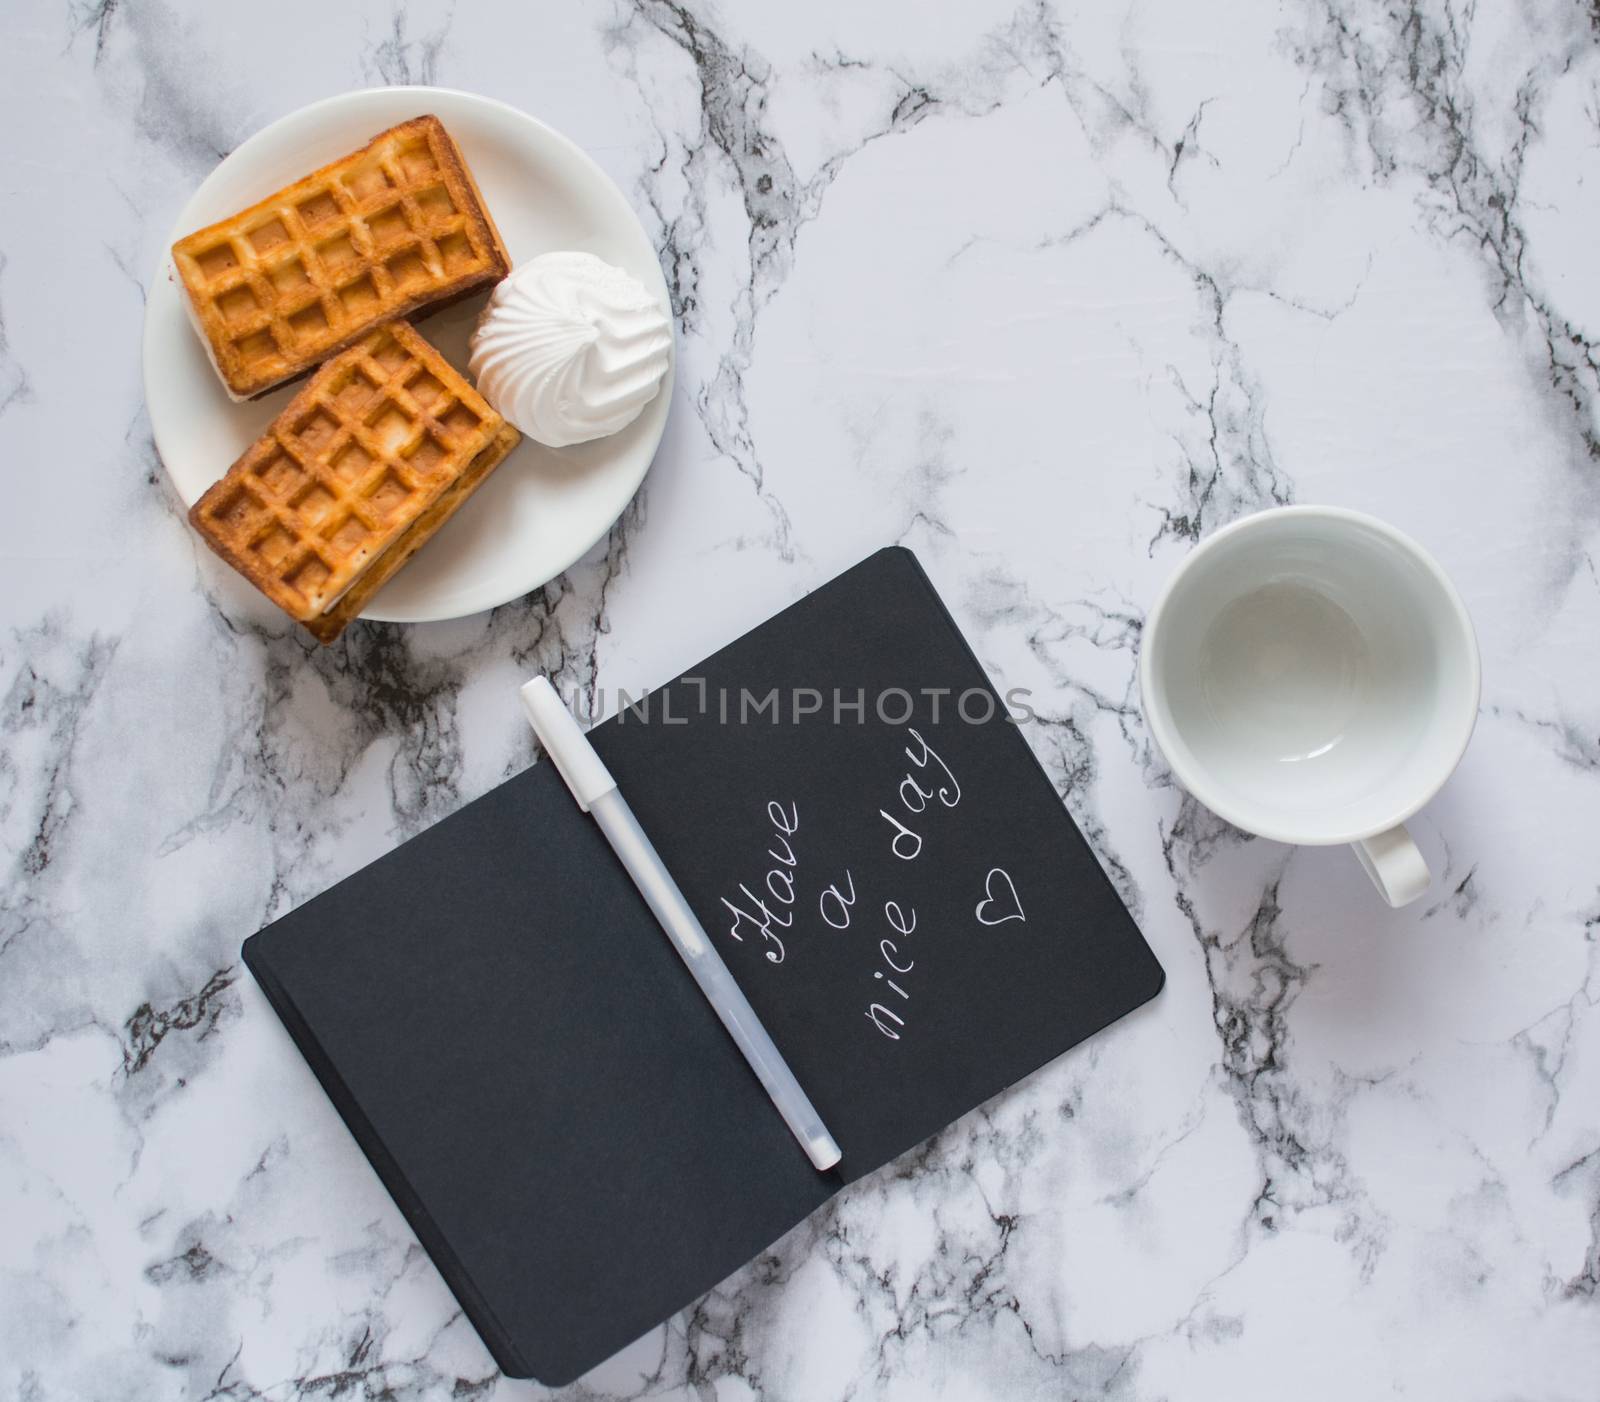 black notebook with lettering on marble background lunch by Izumepho